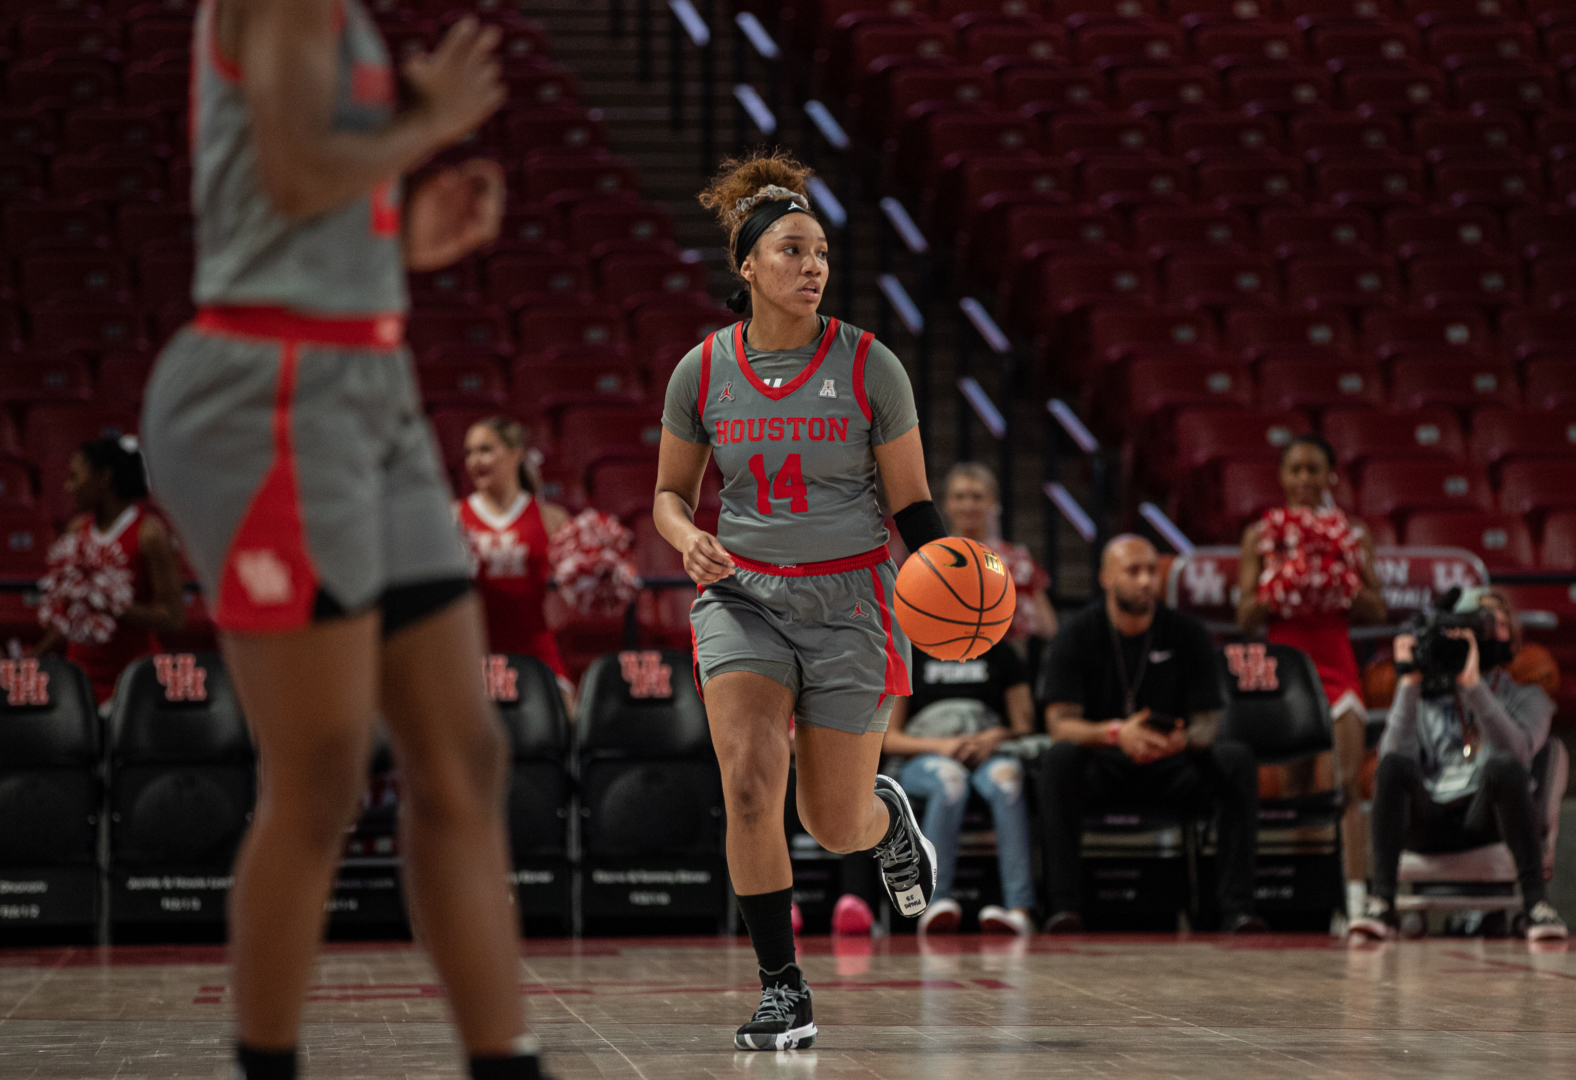 UH women's basketball guard Laila Blair scored 10 points in the Cougars' loss to Memphis on Saturday afternoon. | Sean Thomas/The Cougar